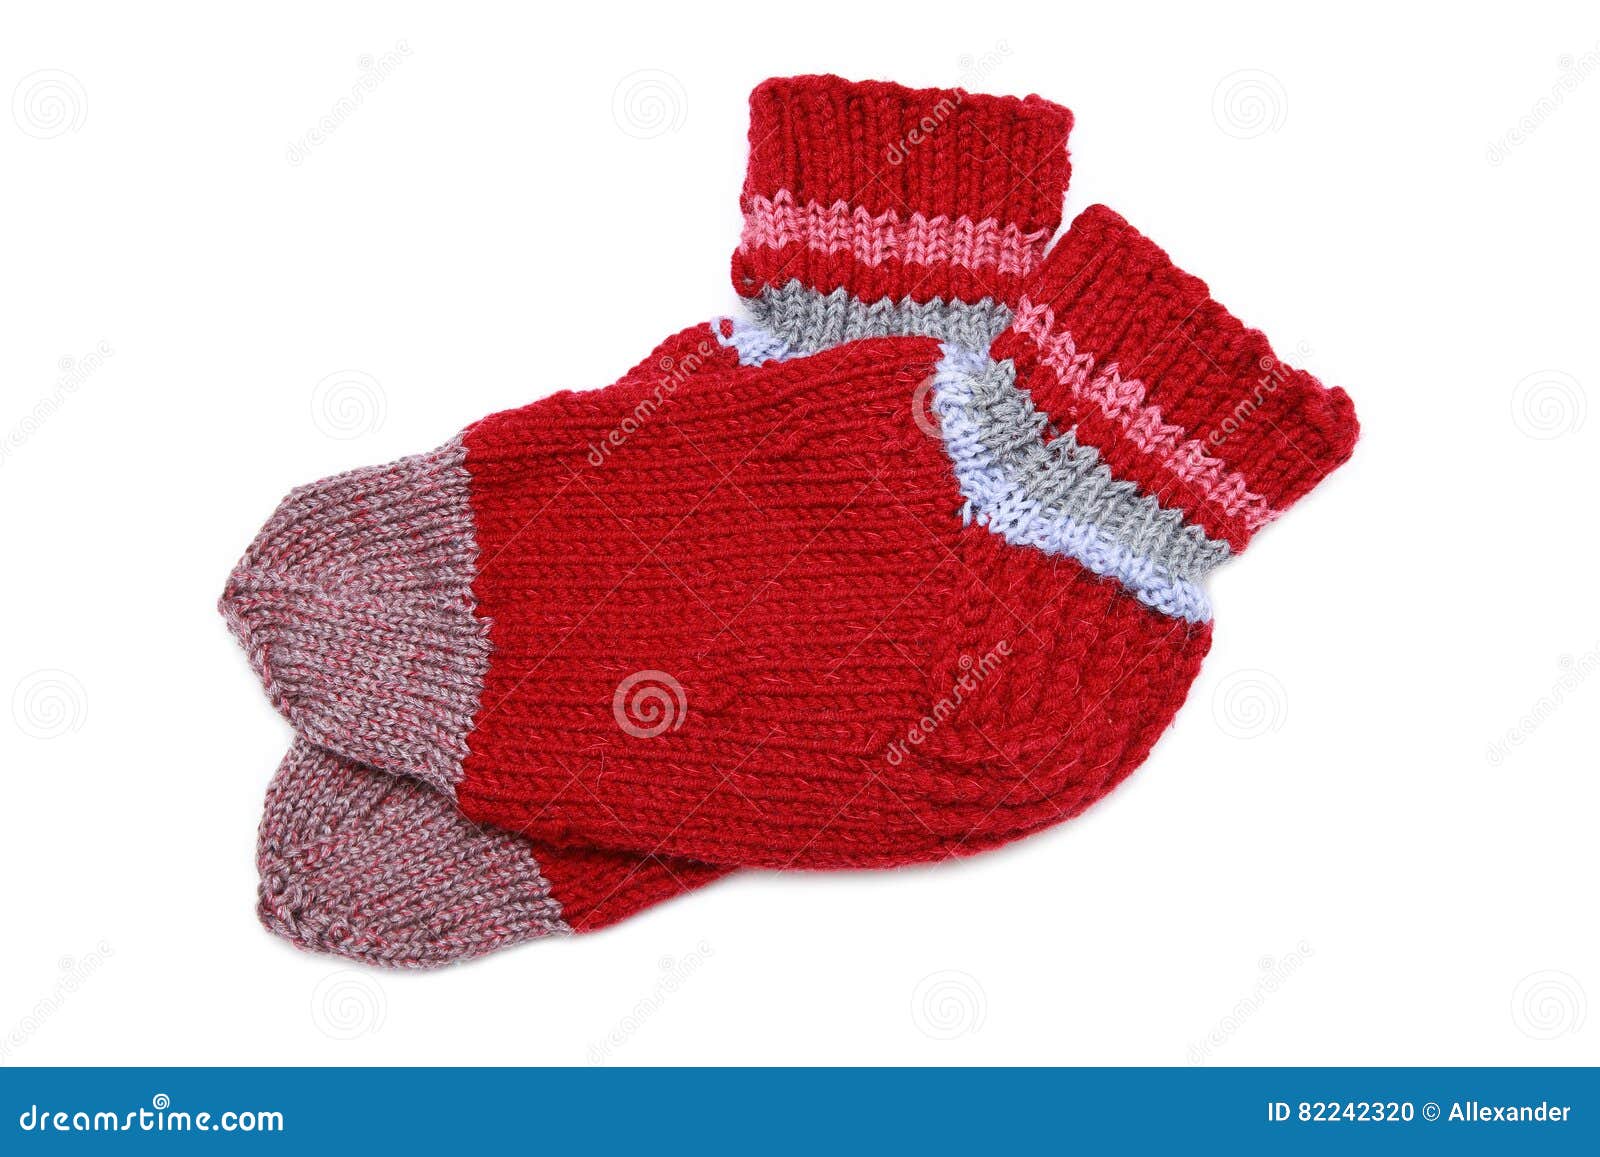 Knitted red socks stock photo. Image of white, pair, striped - 82242320